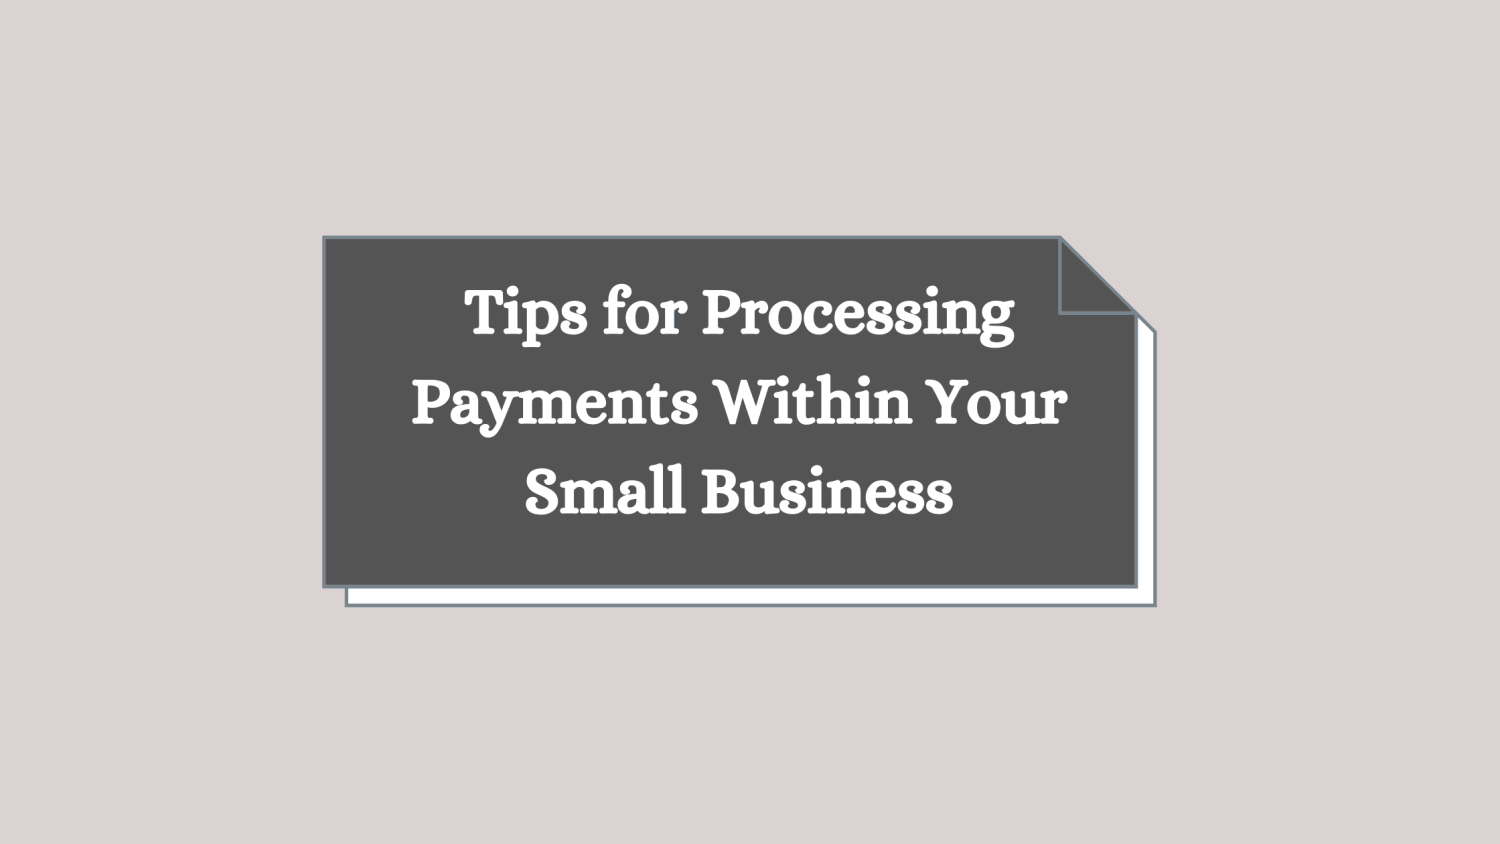 Tips for Processing Payments Within Your Small Business